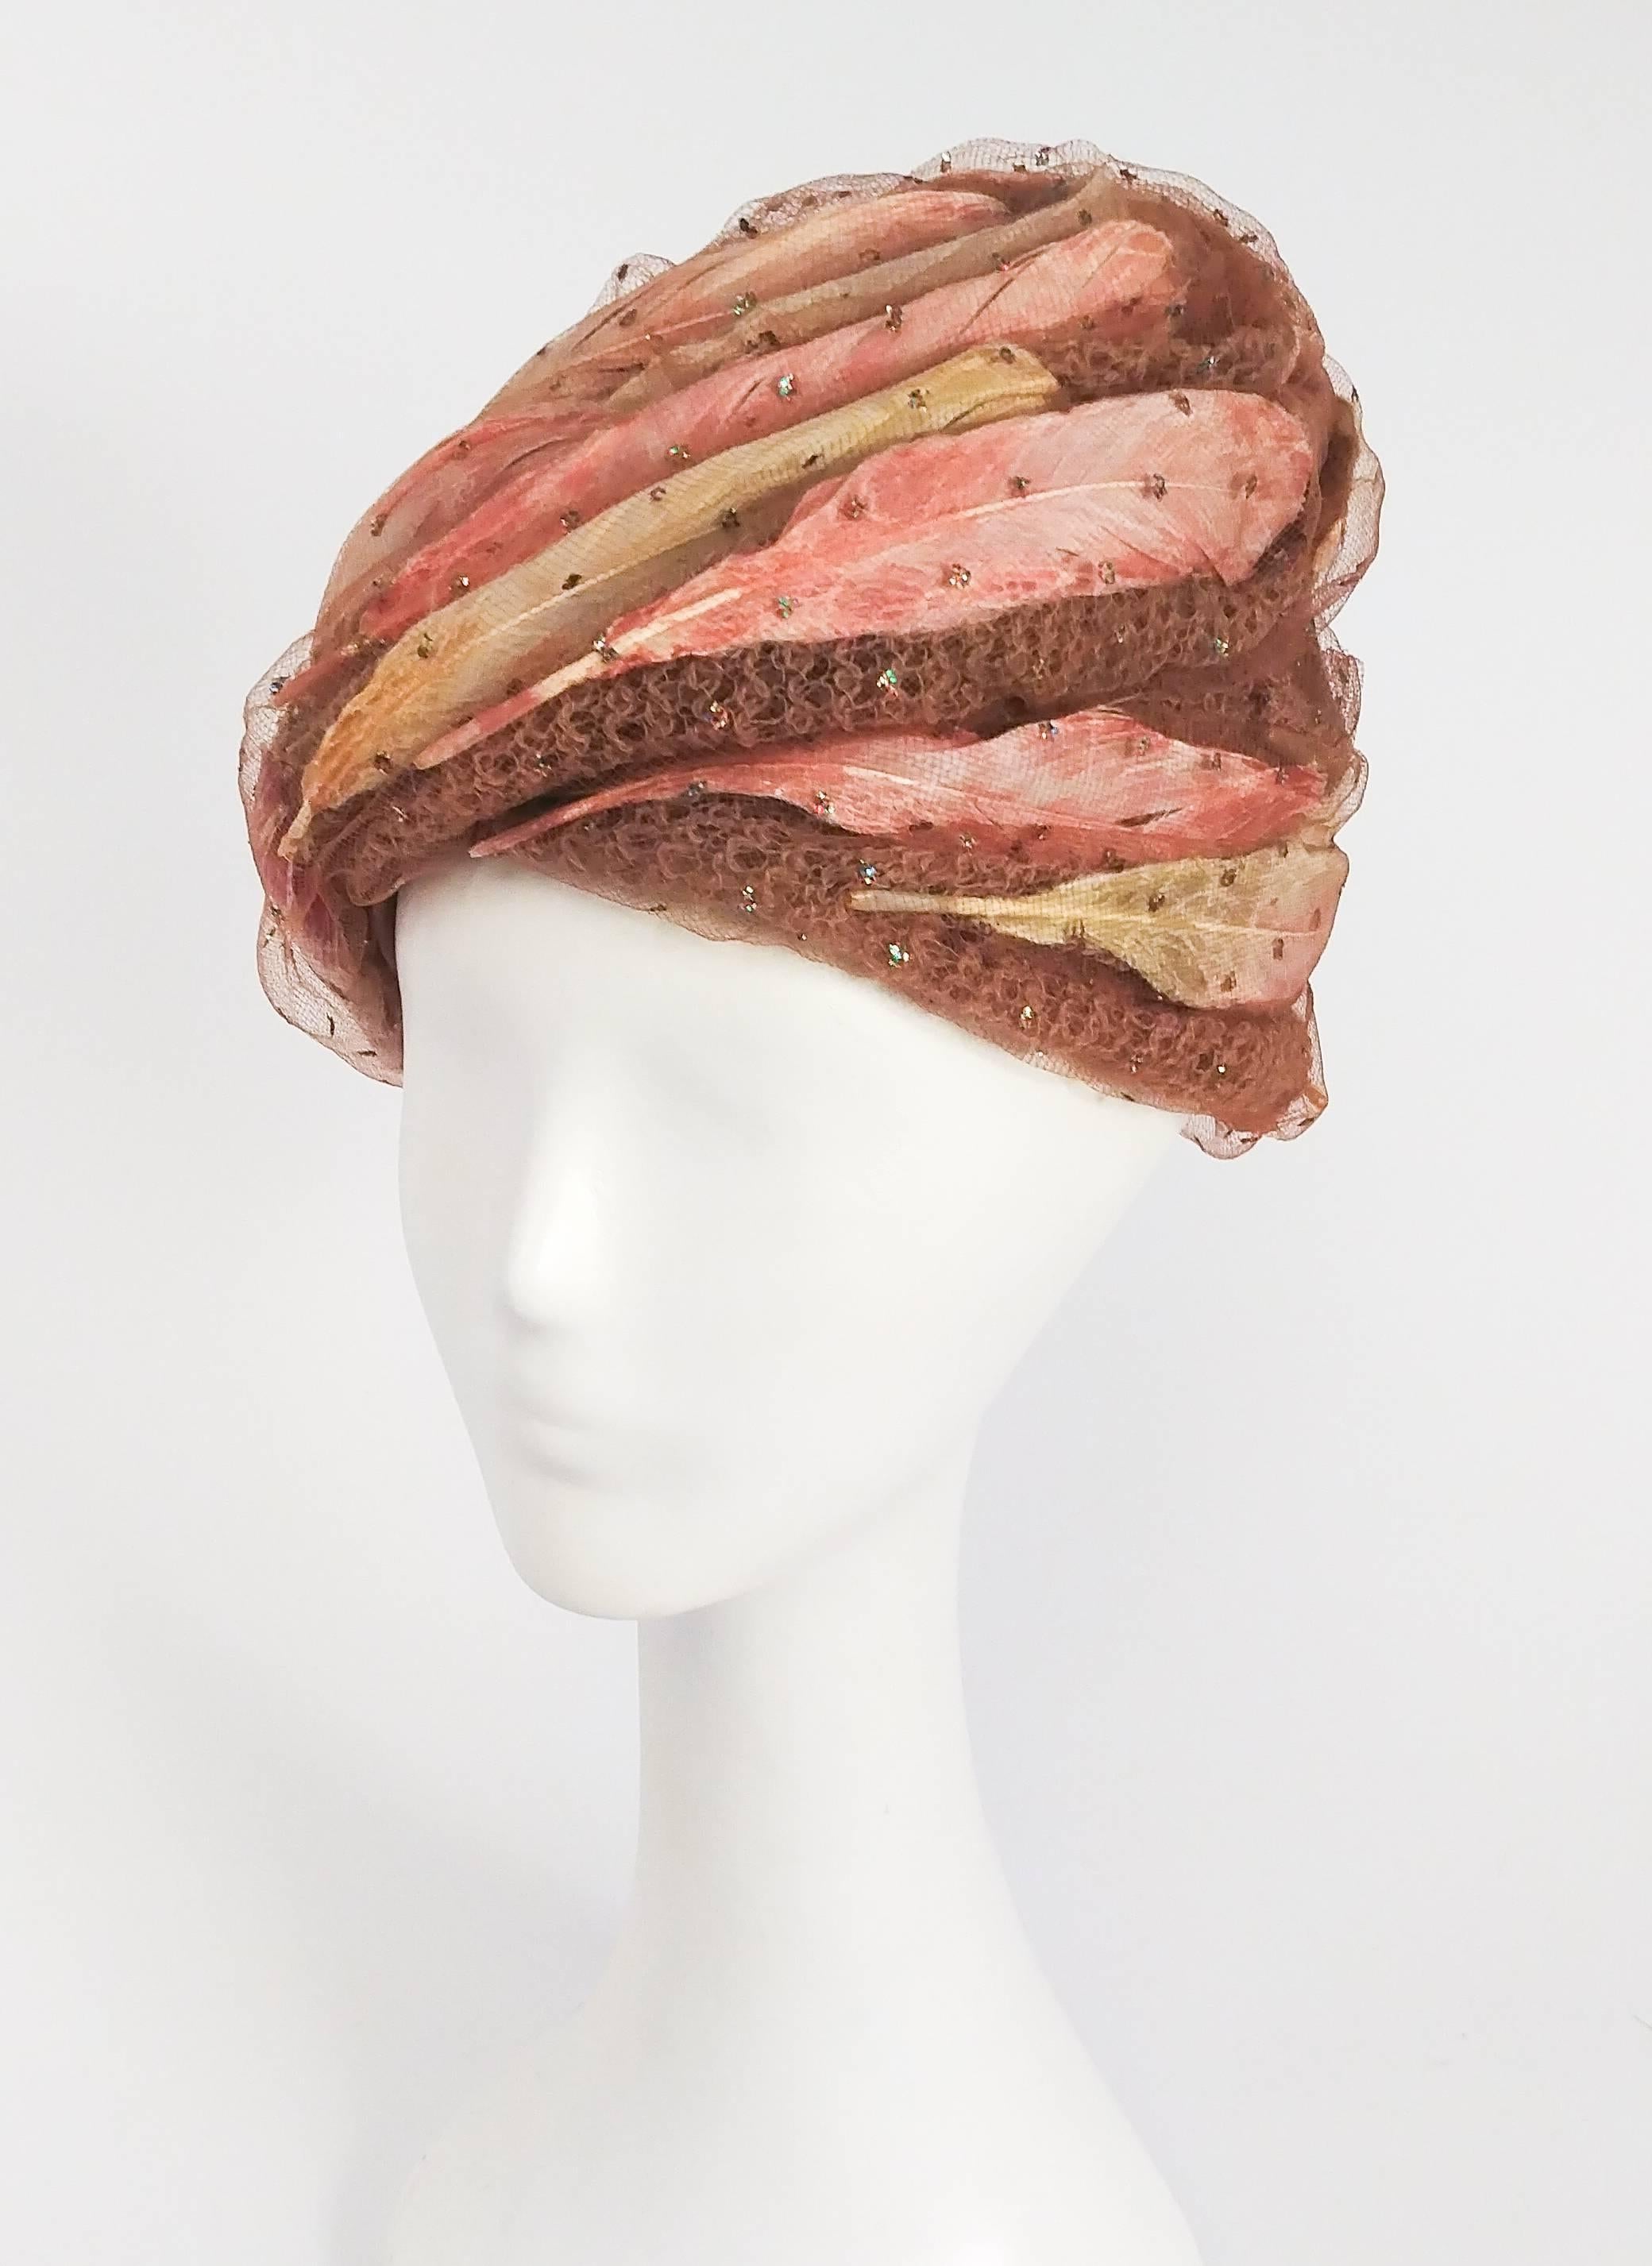 1960s Christian Dior Tulle Turban w/ Feathers. Overlay of tulle fabric with glittery dots, draped in a swirled pattern over pink and peach feathers. 22" circumference. 